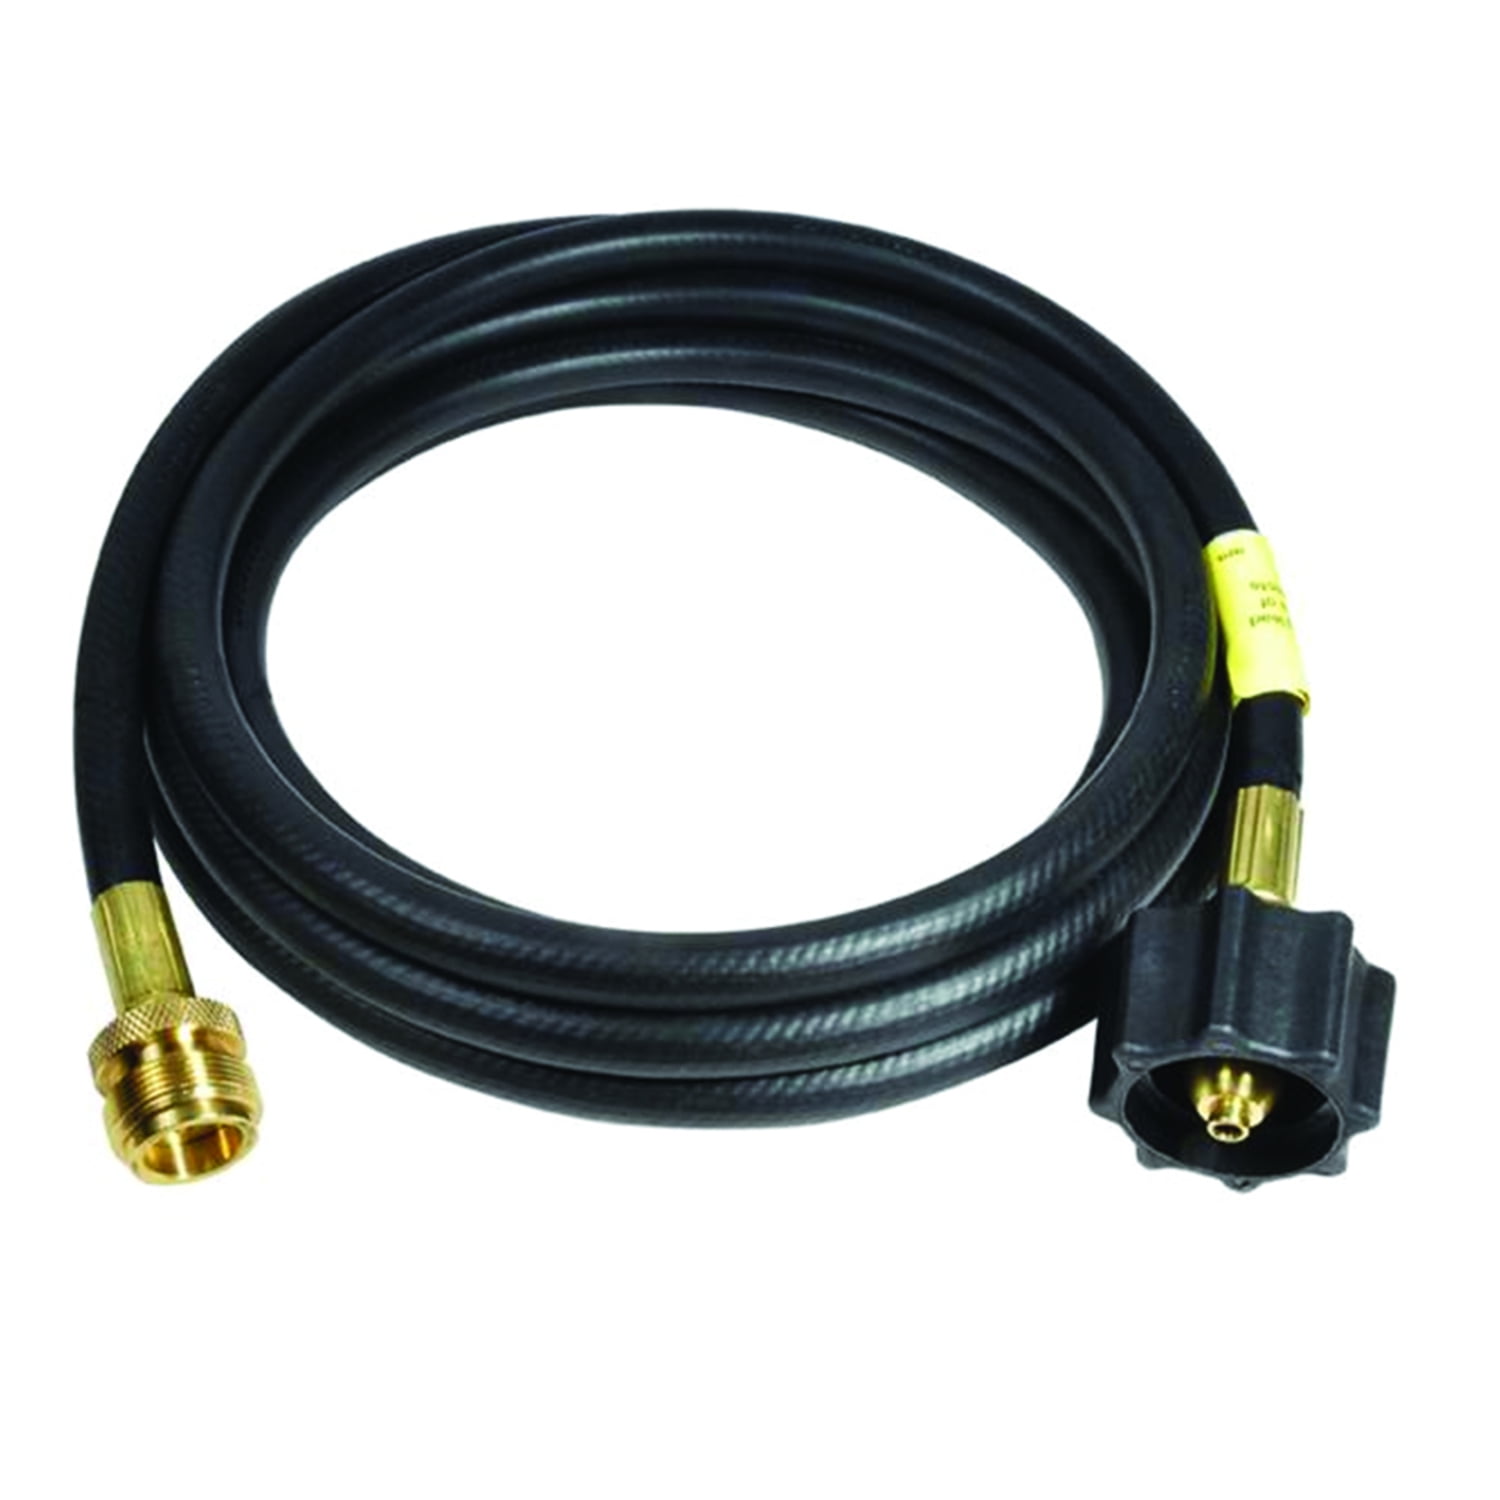 5-Ft Heater F273071 Propane Hose With Regulator Assembly - Quantity 1 Mr 